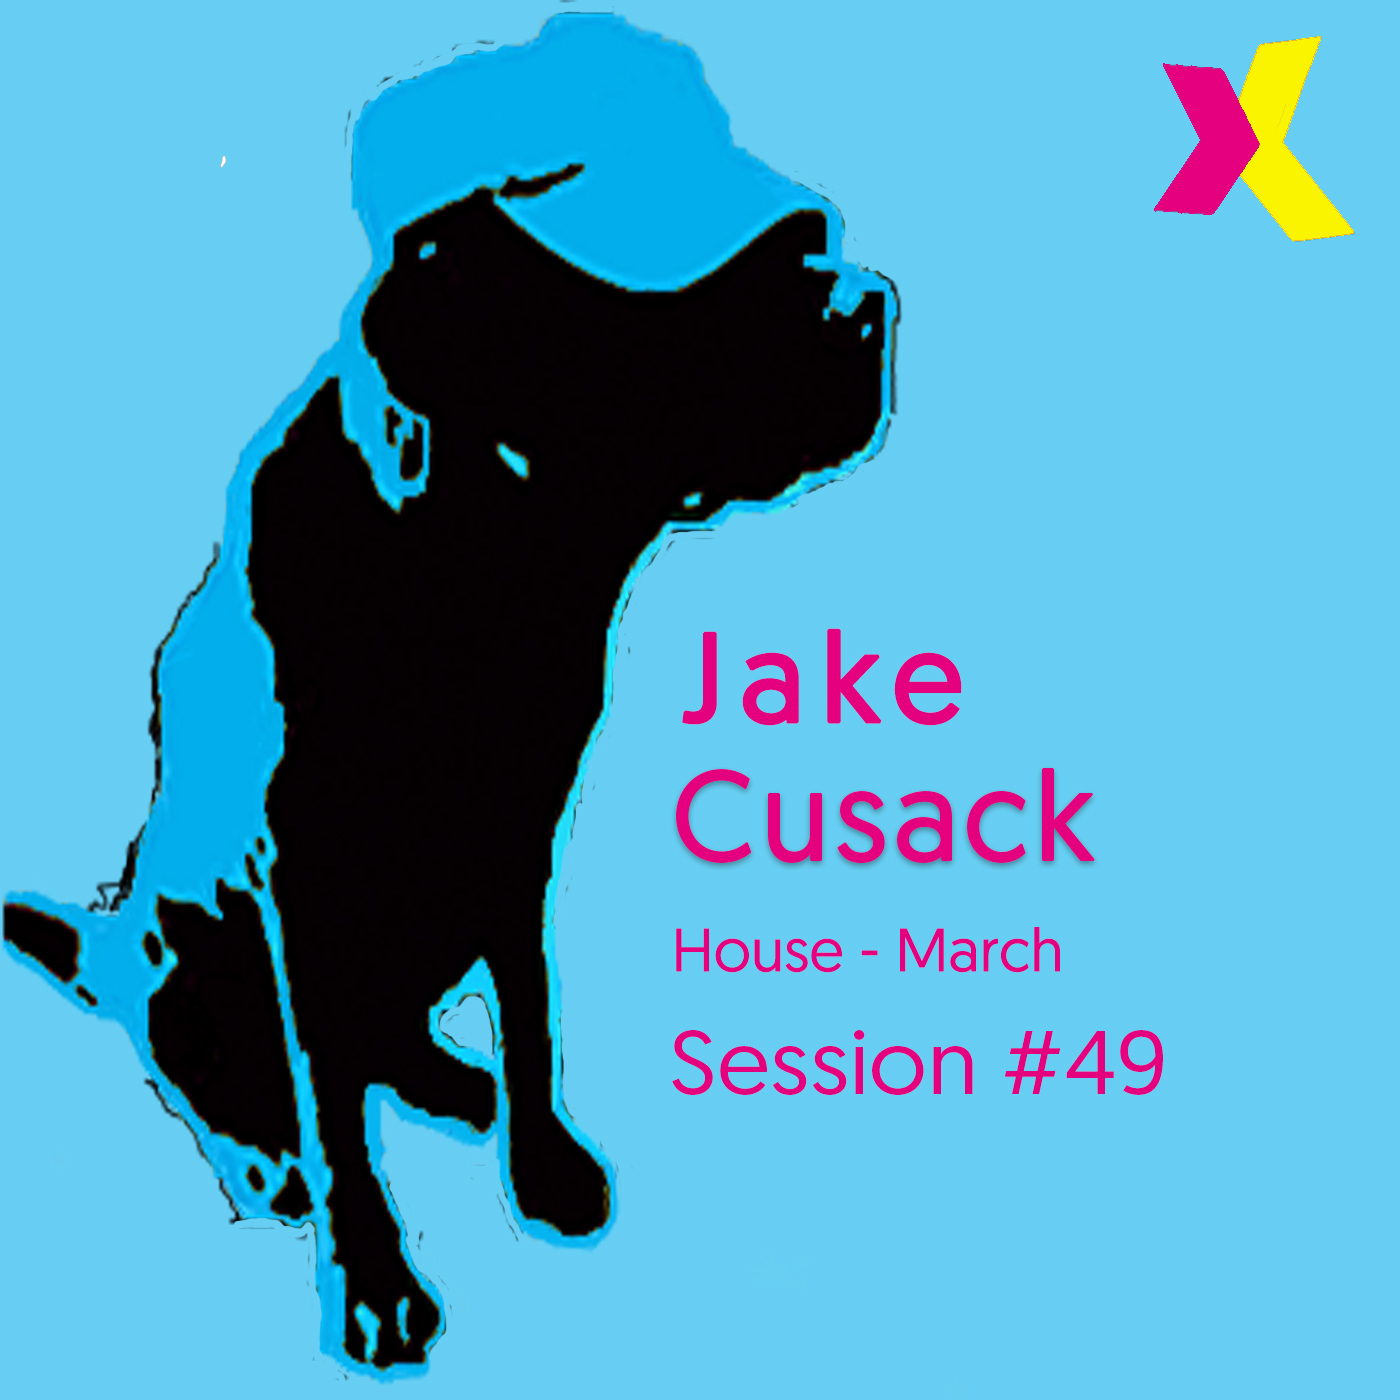 Jake Cusack - House - March - Session 49